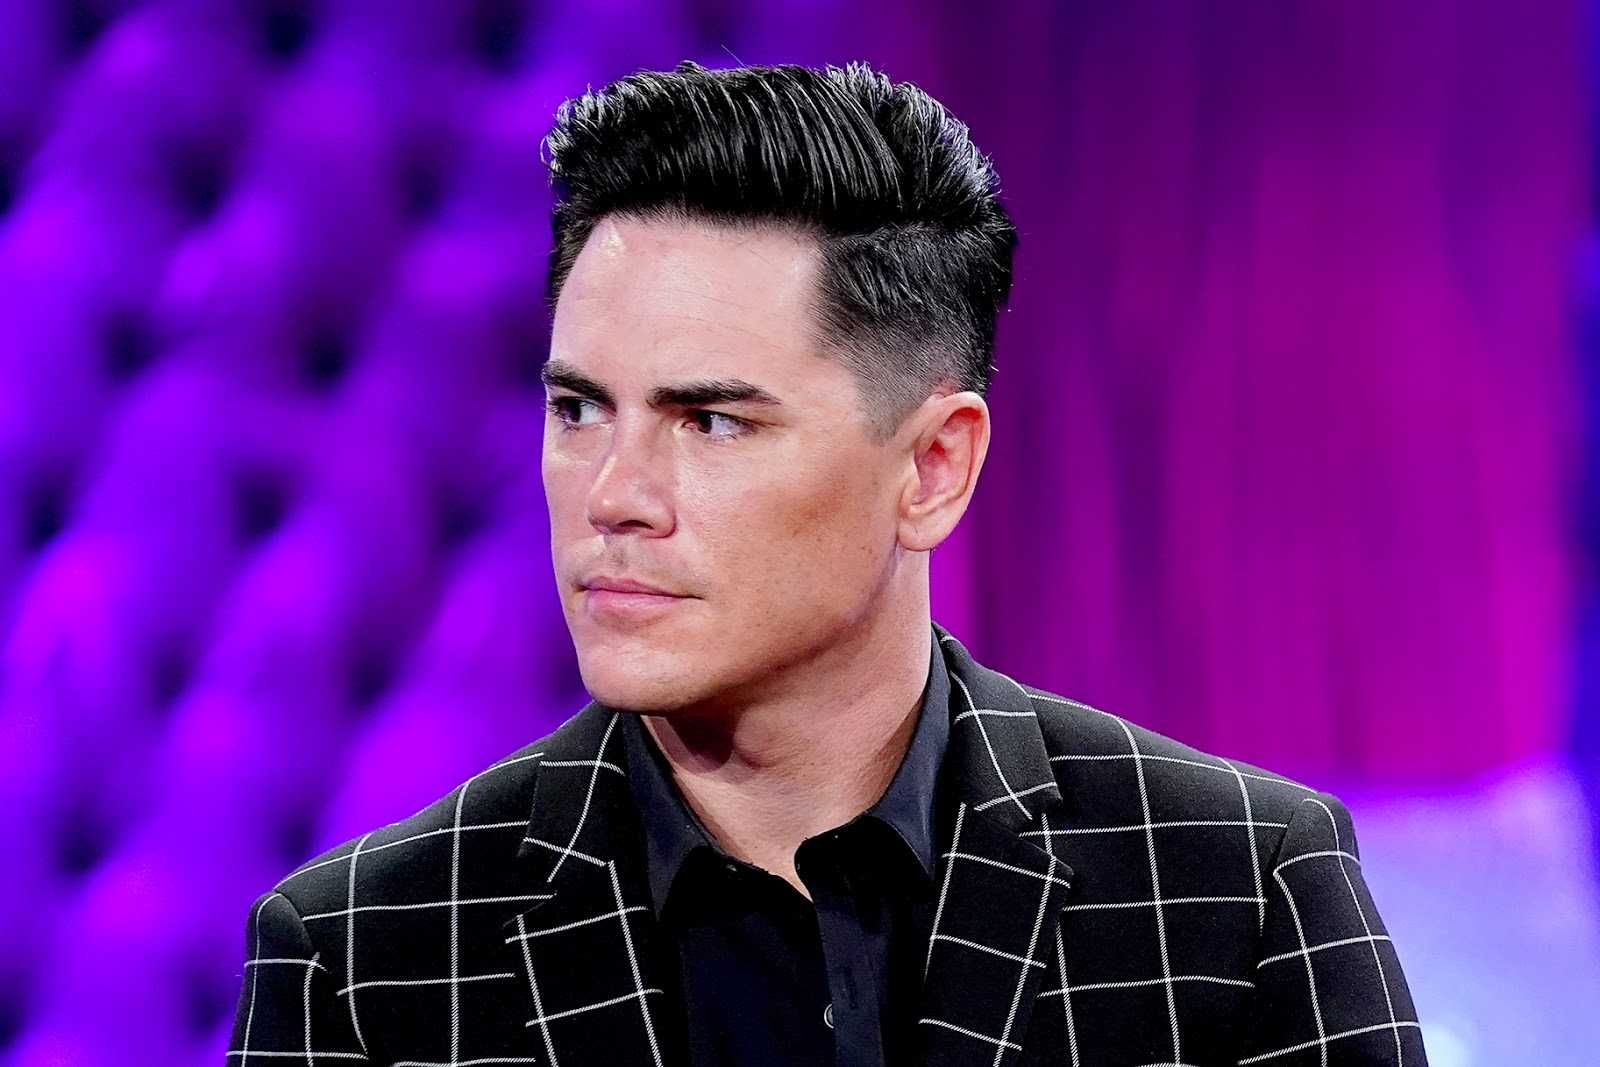 'Some of the guys got a little sunburnt' - Tom Sandoval's makeover mission at Scheana's wedding